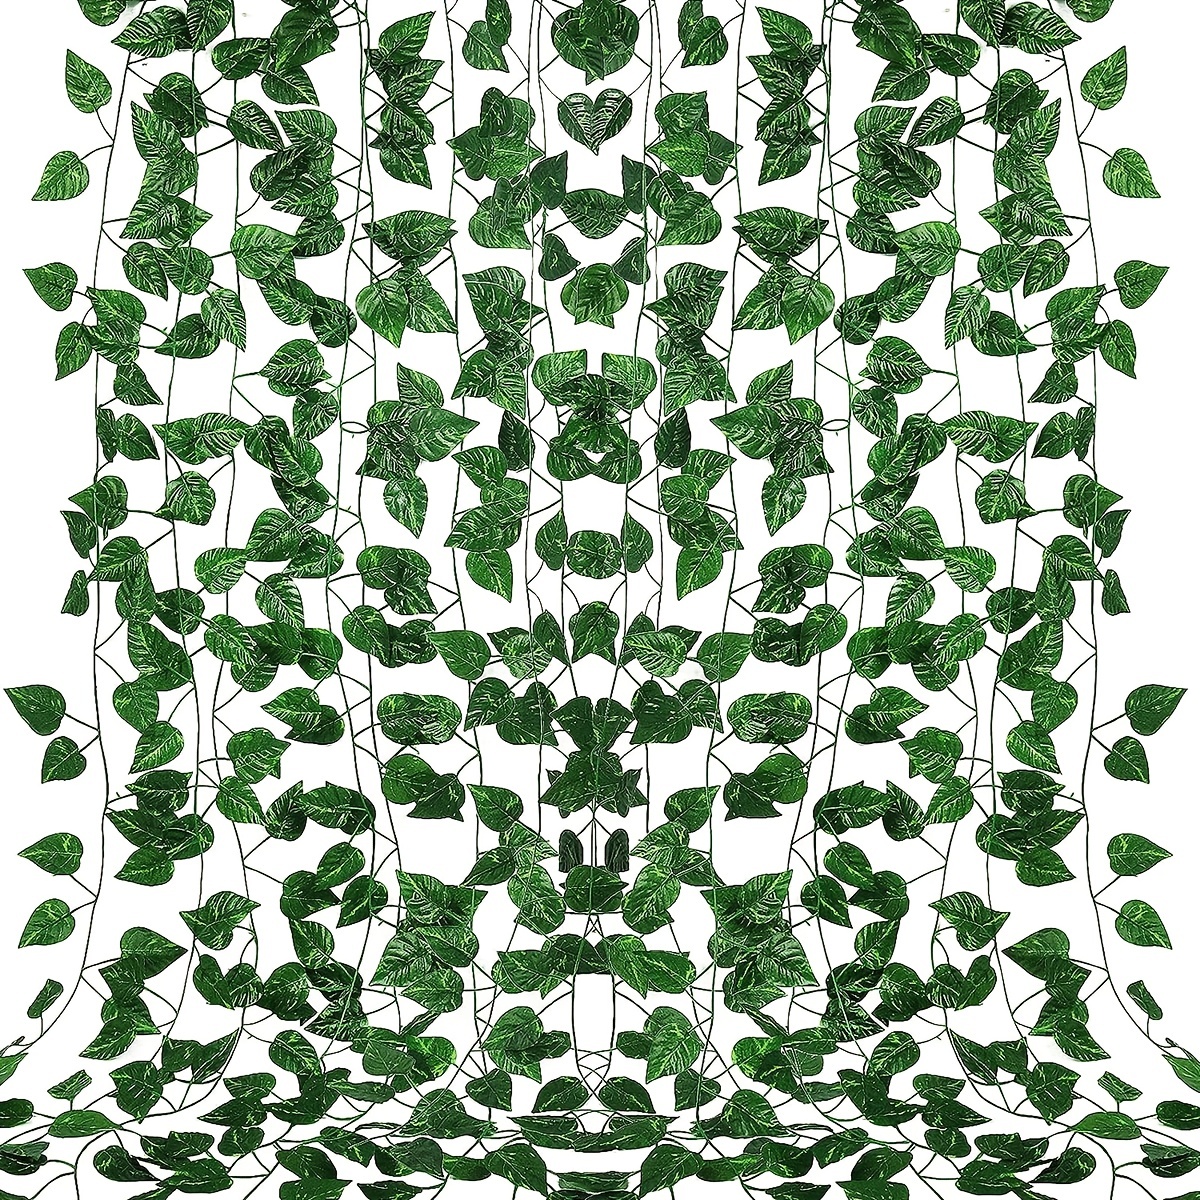 12Pcs Fake Leaves Artificial Ivy Garland, Green Leaves Vines